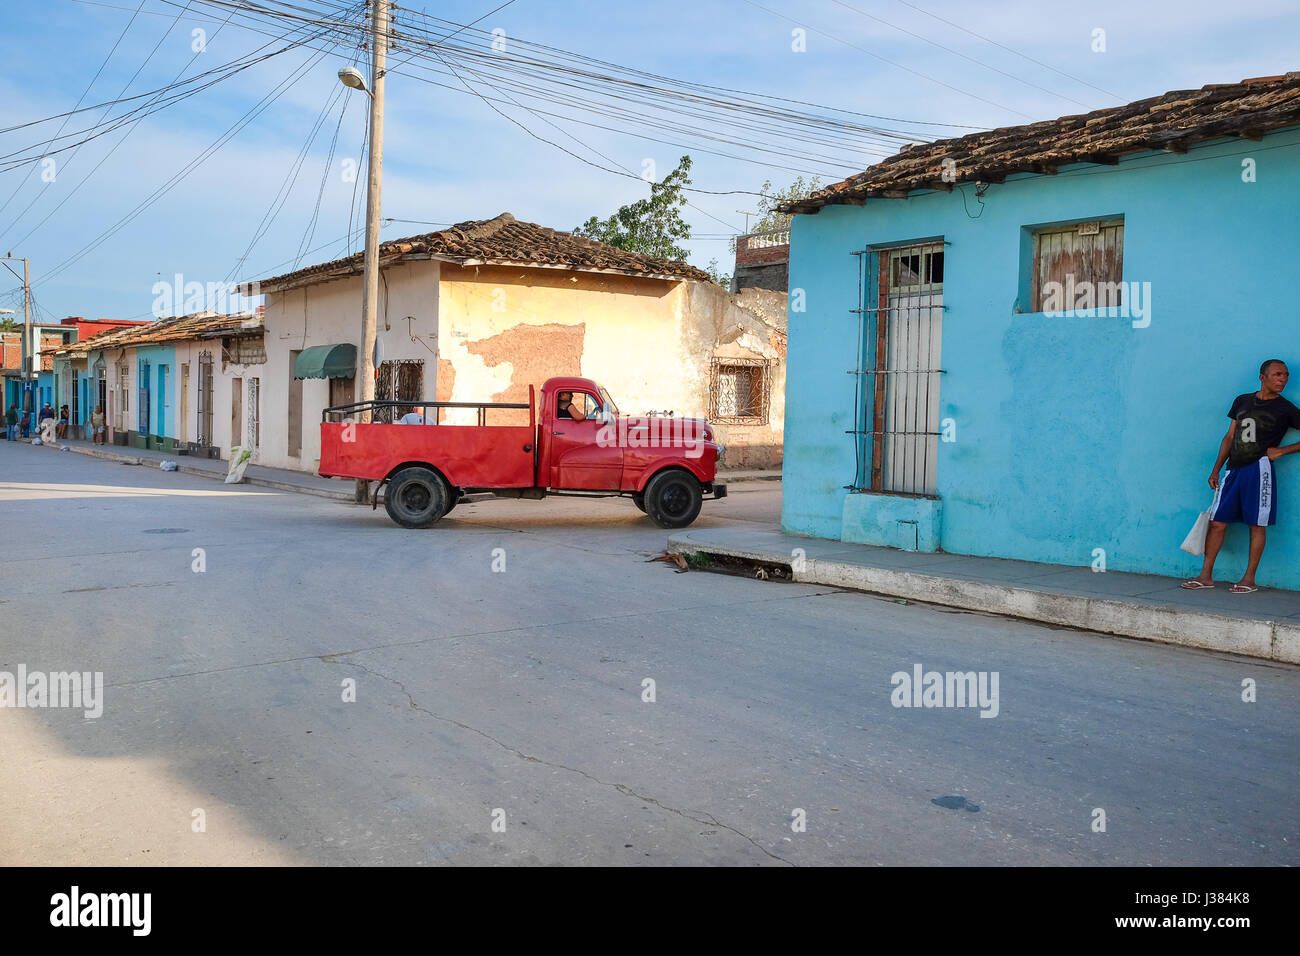 streets of trinidad, Cuba, red pickup driving by Stock Photo